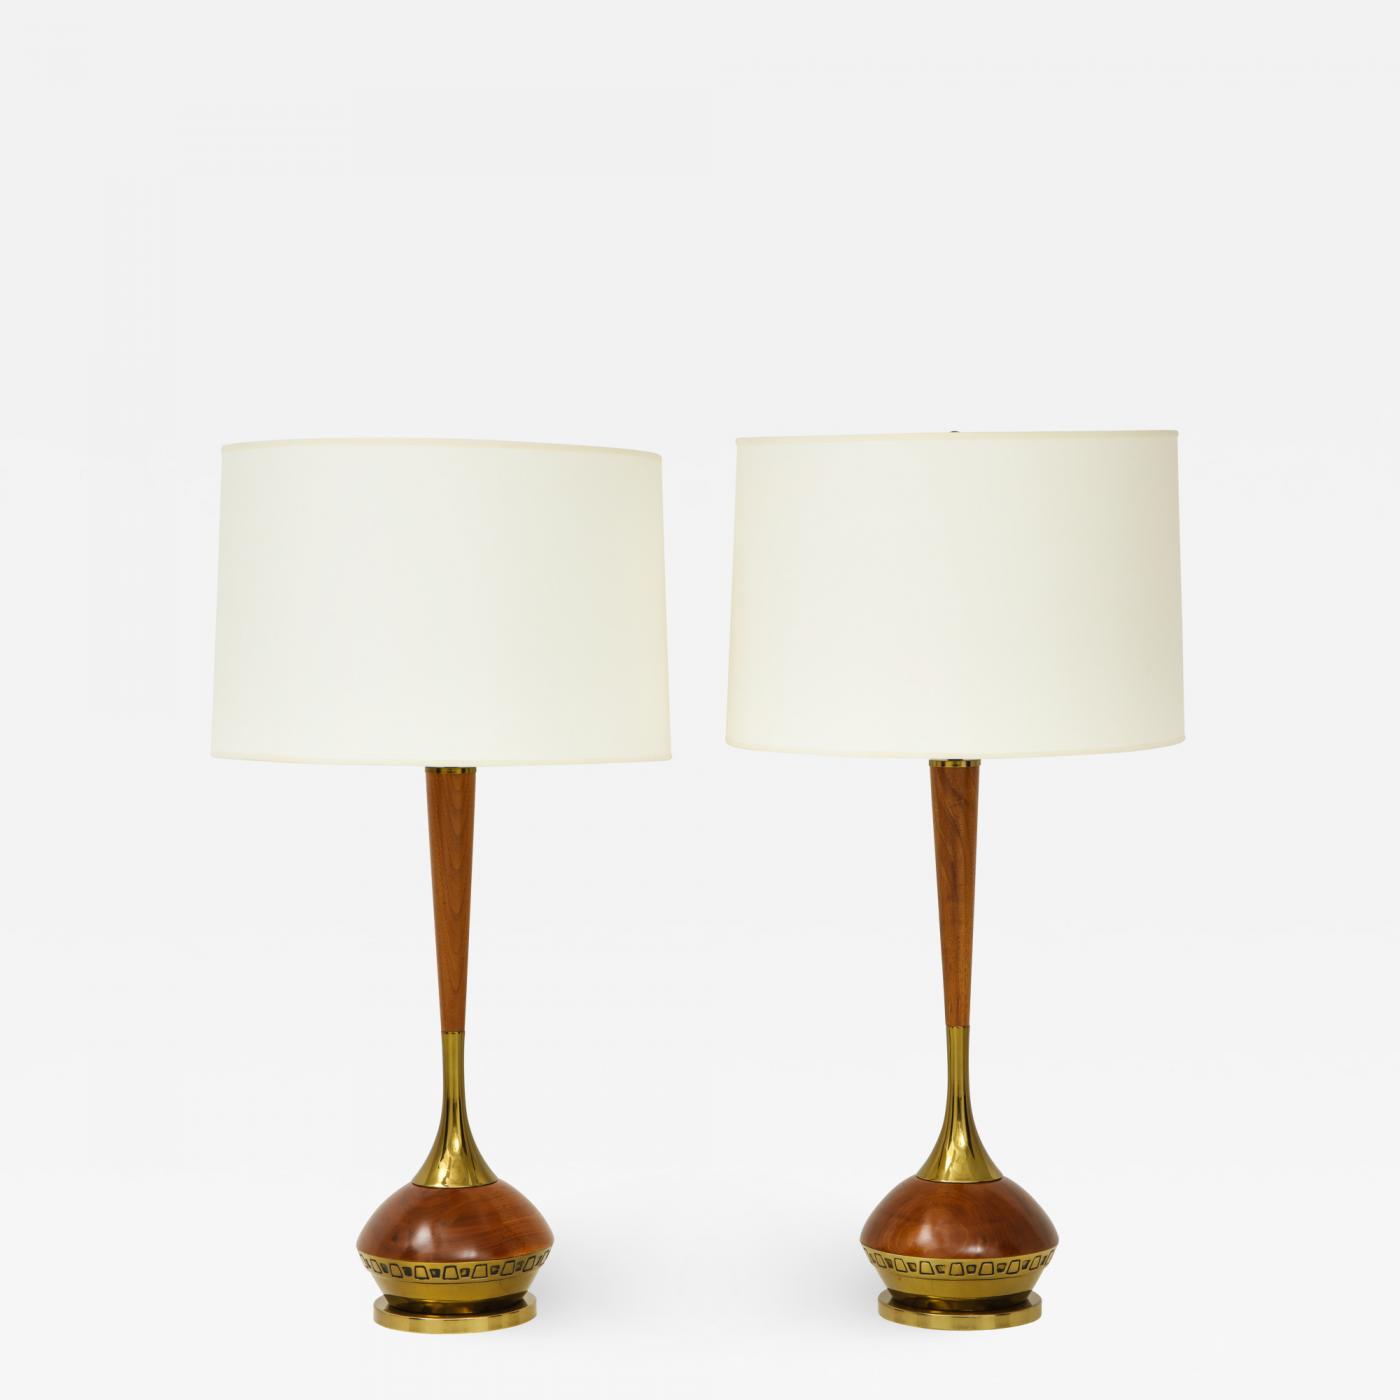 Pair of Mid Century Modern table lamps. By Laurel Lamp Company.